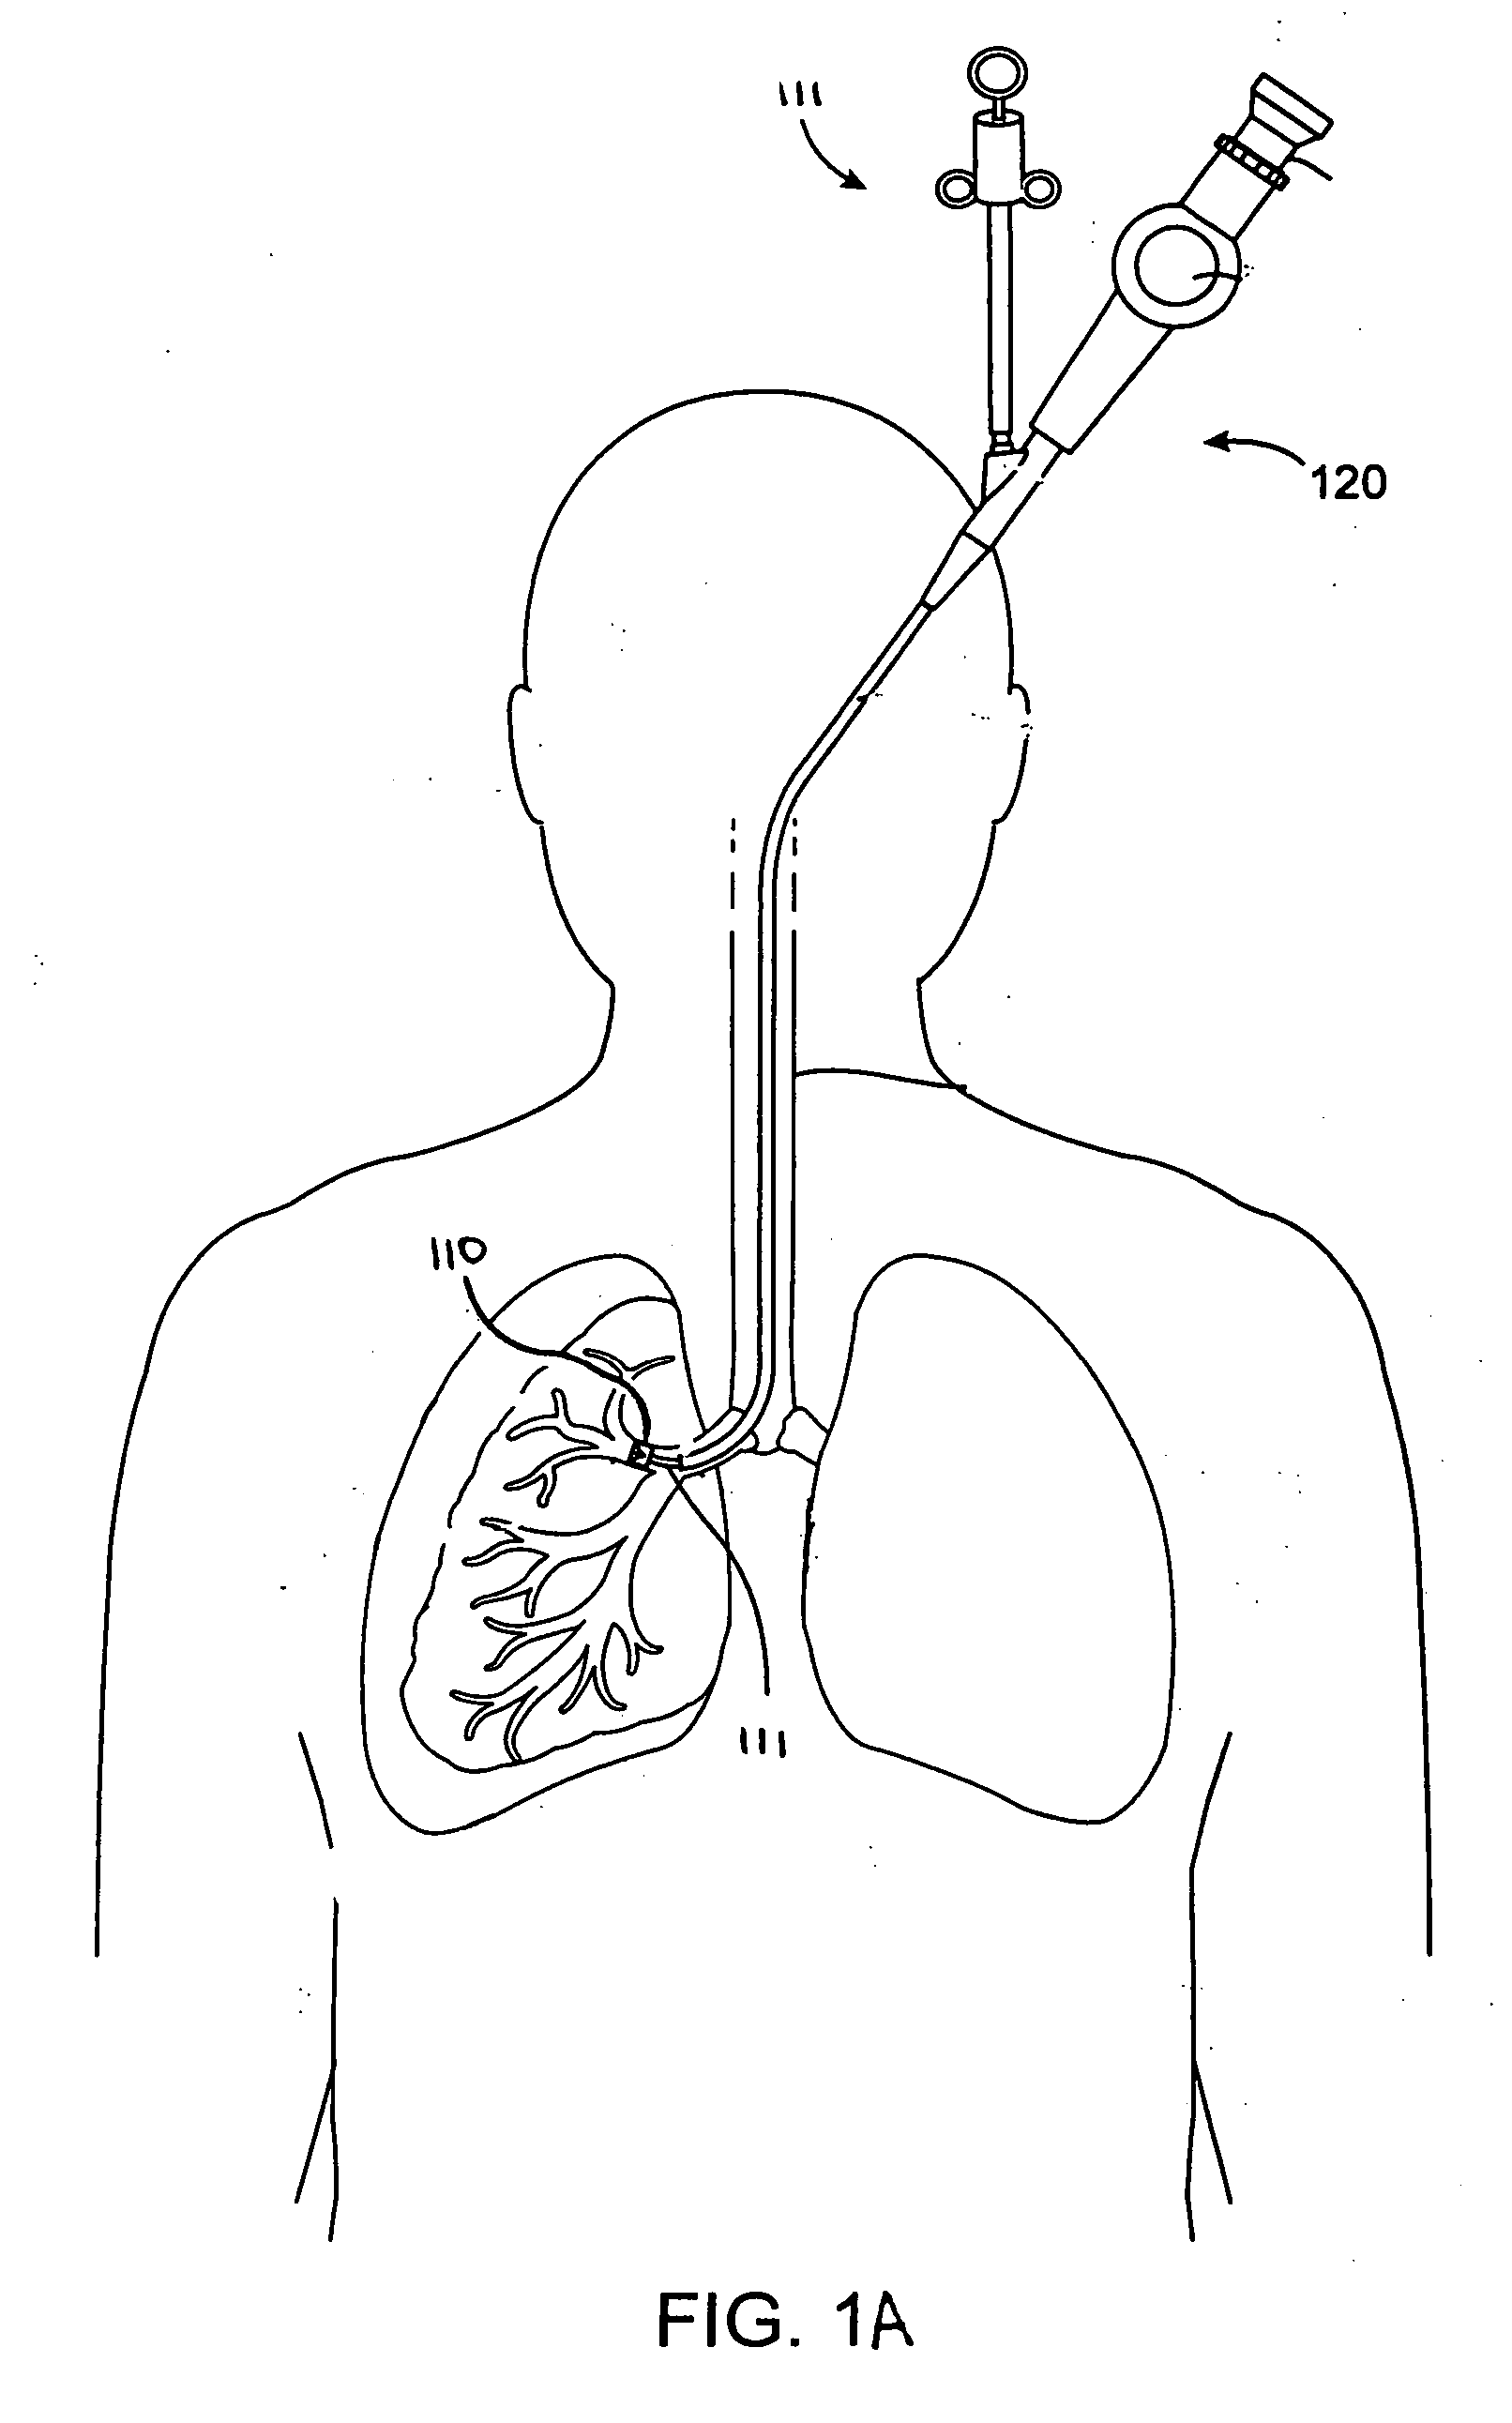 Treatment planning with implantable bronchial isolation devices